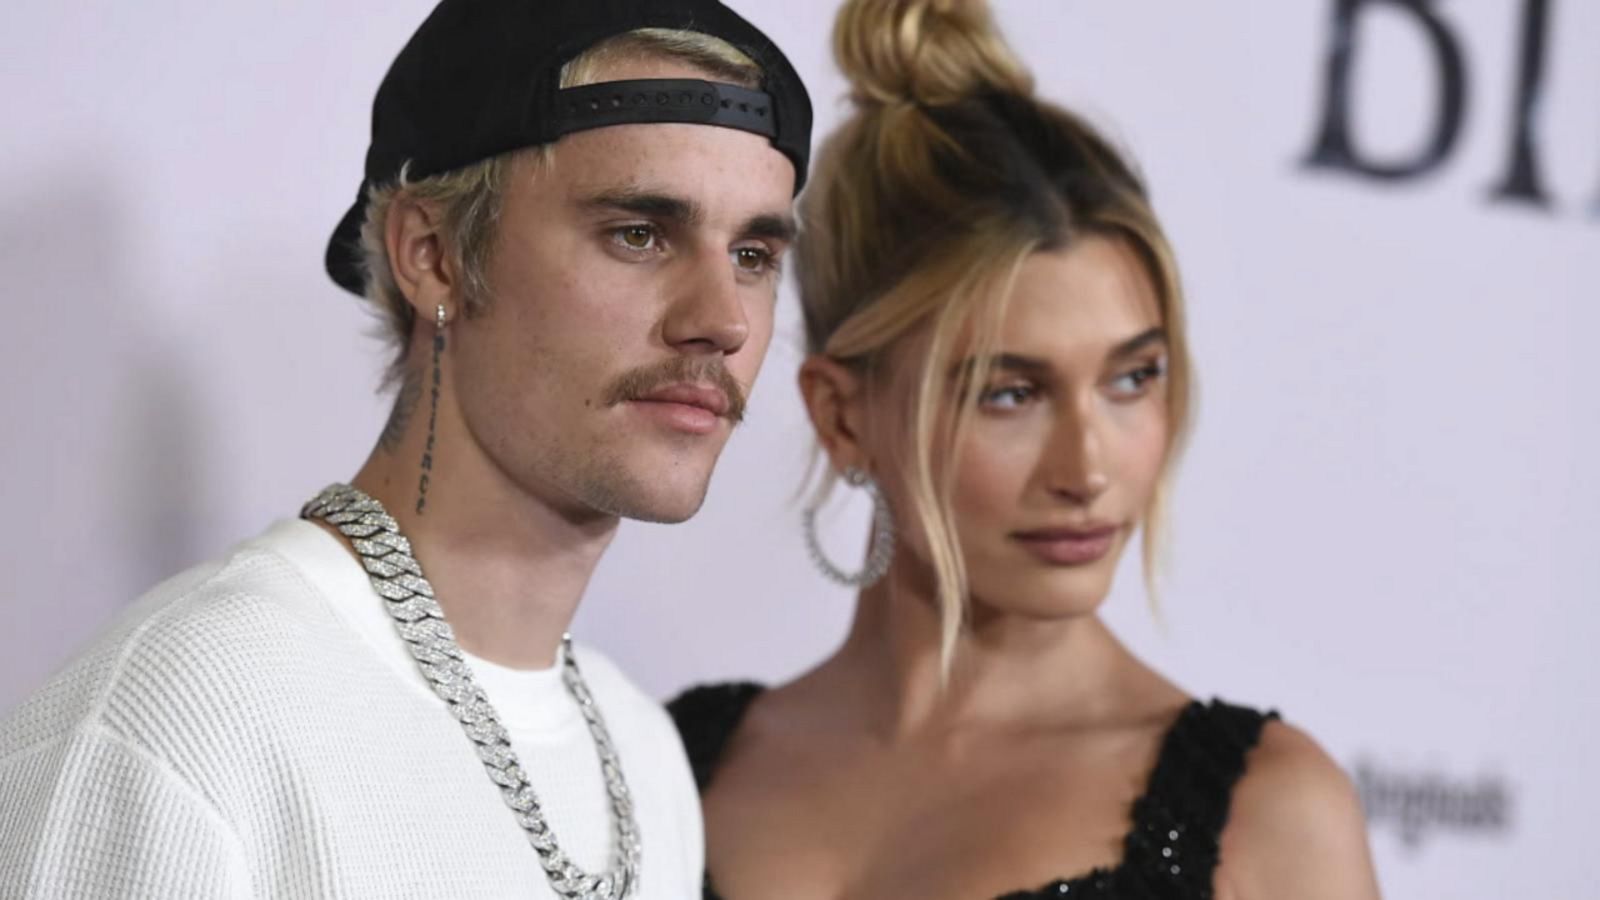 VIDEO: Hailey Bieber opens up about 'evolving' marriage to Justin Bieber